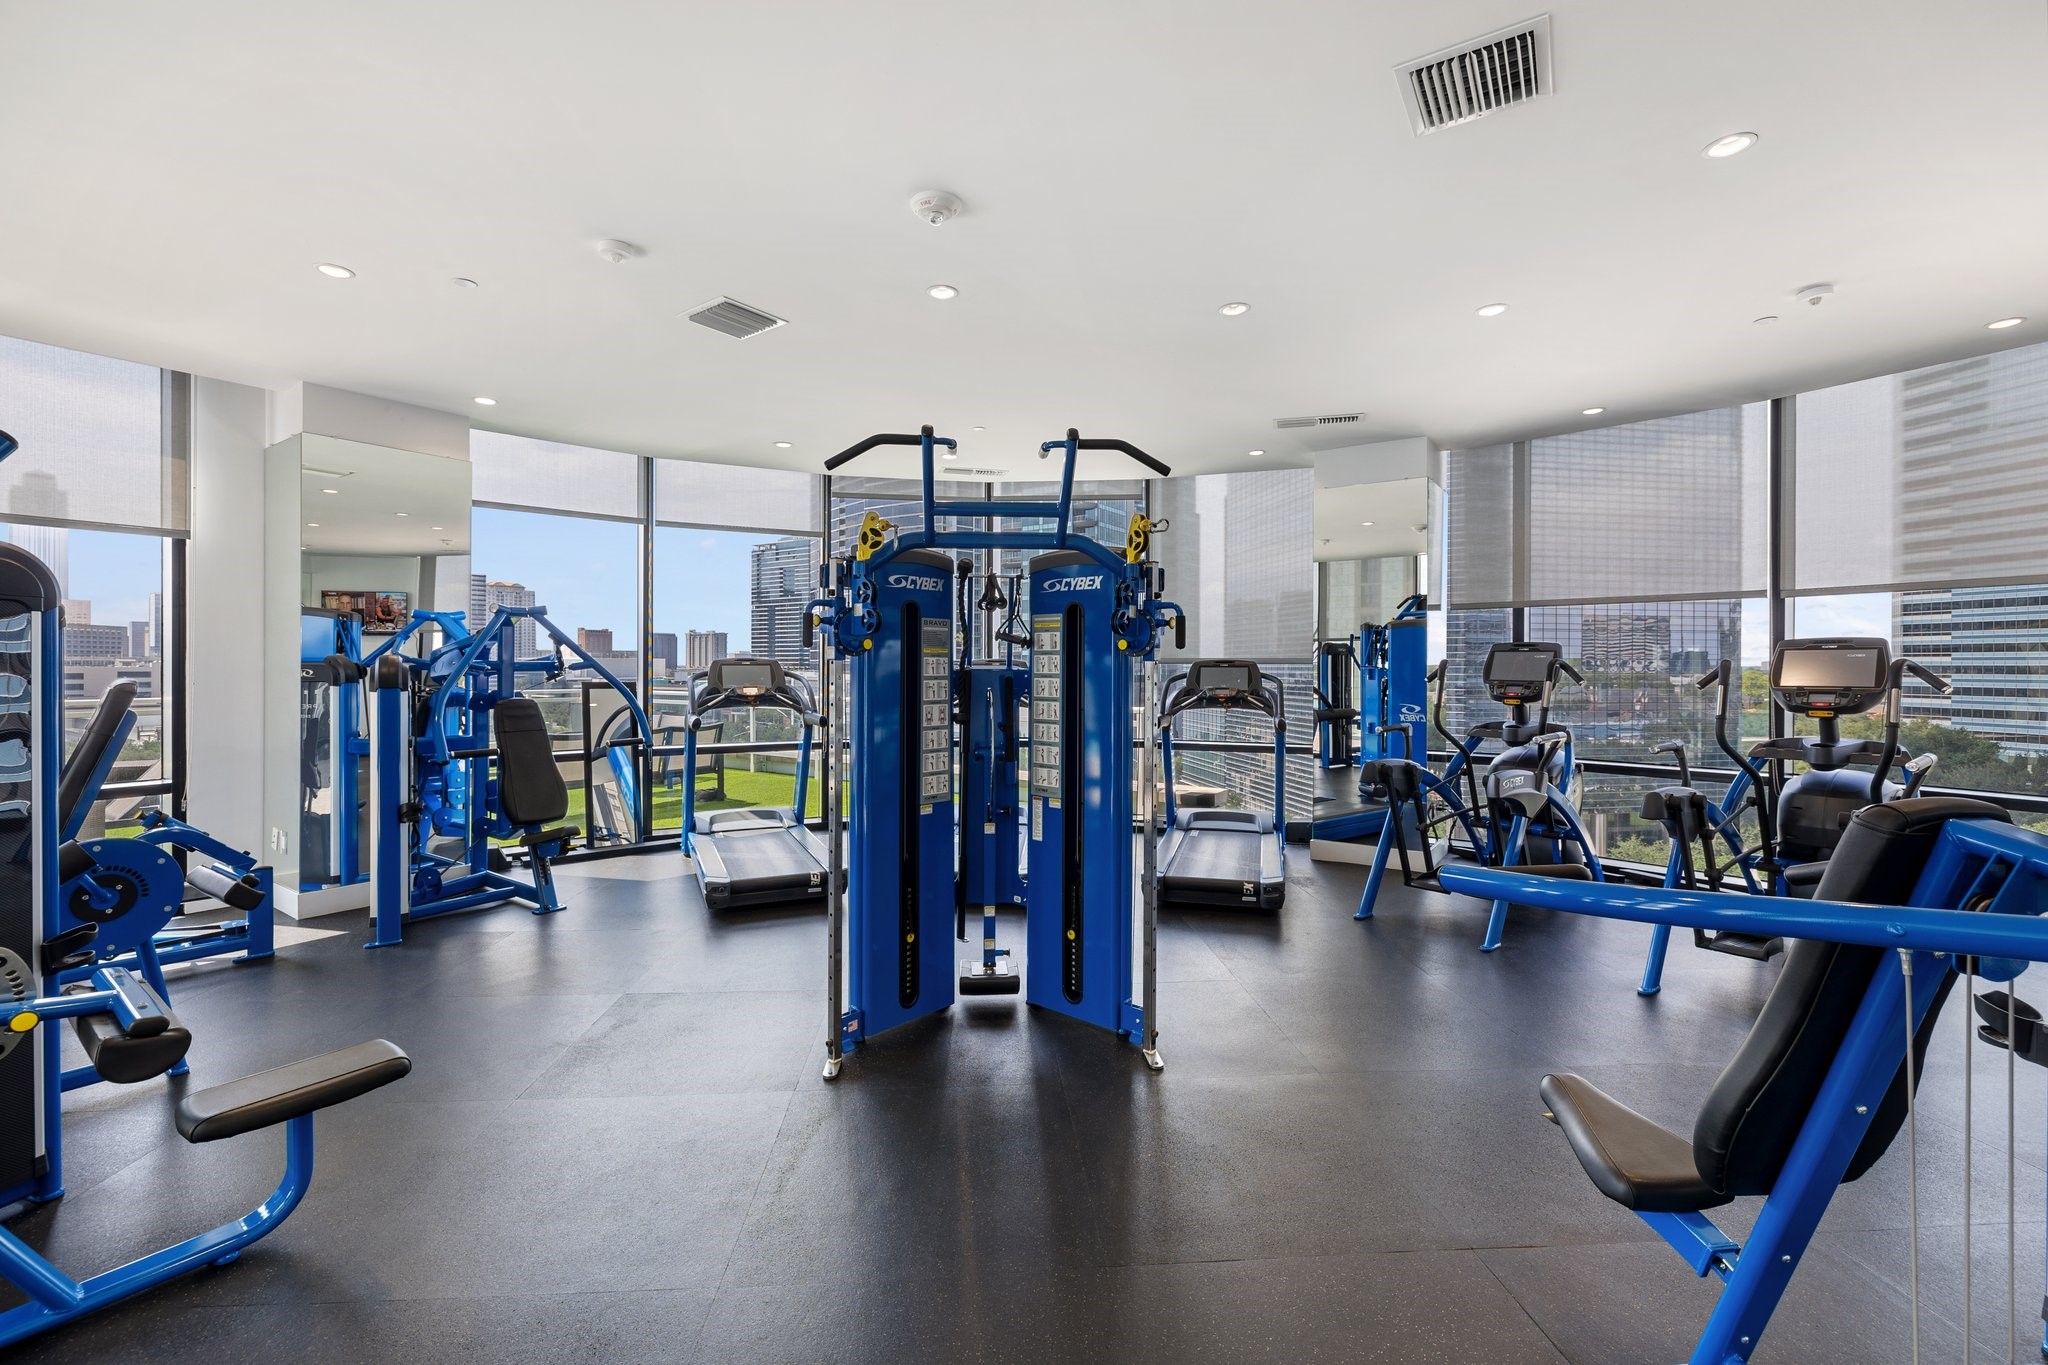 This state-of-the-art gym boasts not only top-tier fitness equipment but also expansive windows that provide a breathtaking view of Uptown Houston's skyline. The generous infusion of natural light creates an energizing ambiance, perfect for a motivating workout. The juxtaposition of sleek, modern gym equipment against the backdrop of the city's architectural marvels offers a unique workout experience. Whether you're running on the treadmill or lifting weights, the view ensures your workouts are both